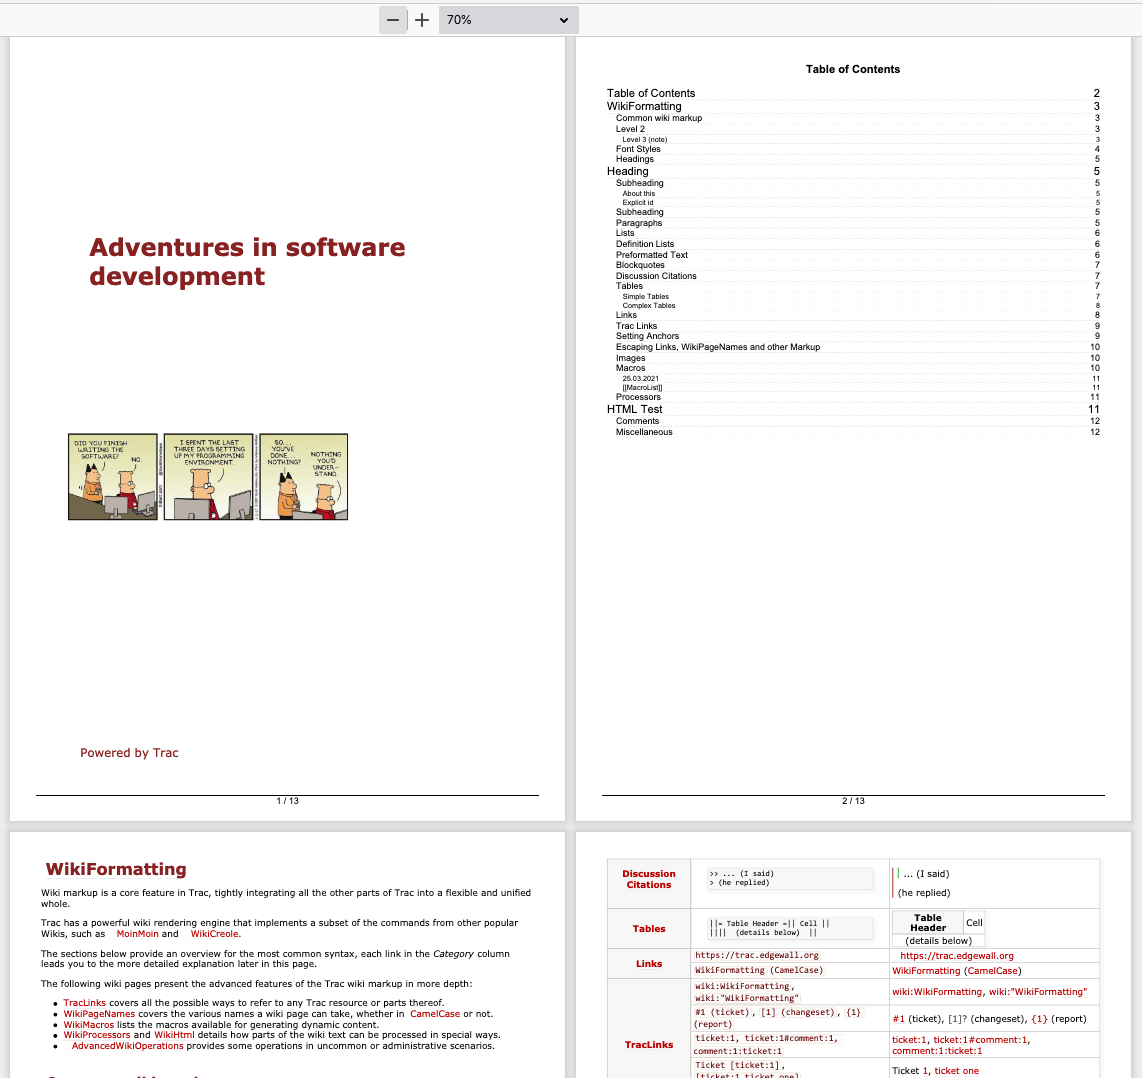 Screenshot of a PDF book with cover page and table of contents